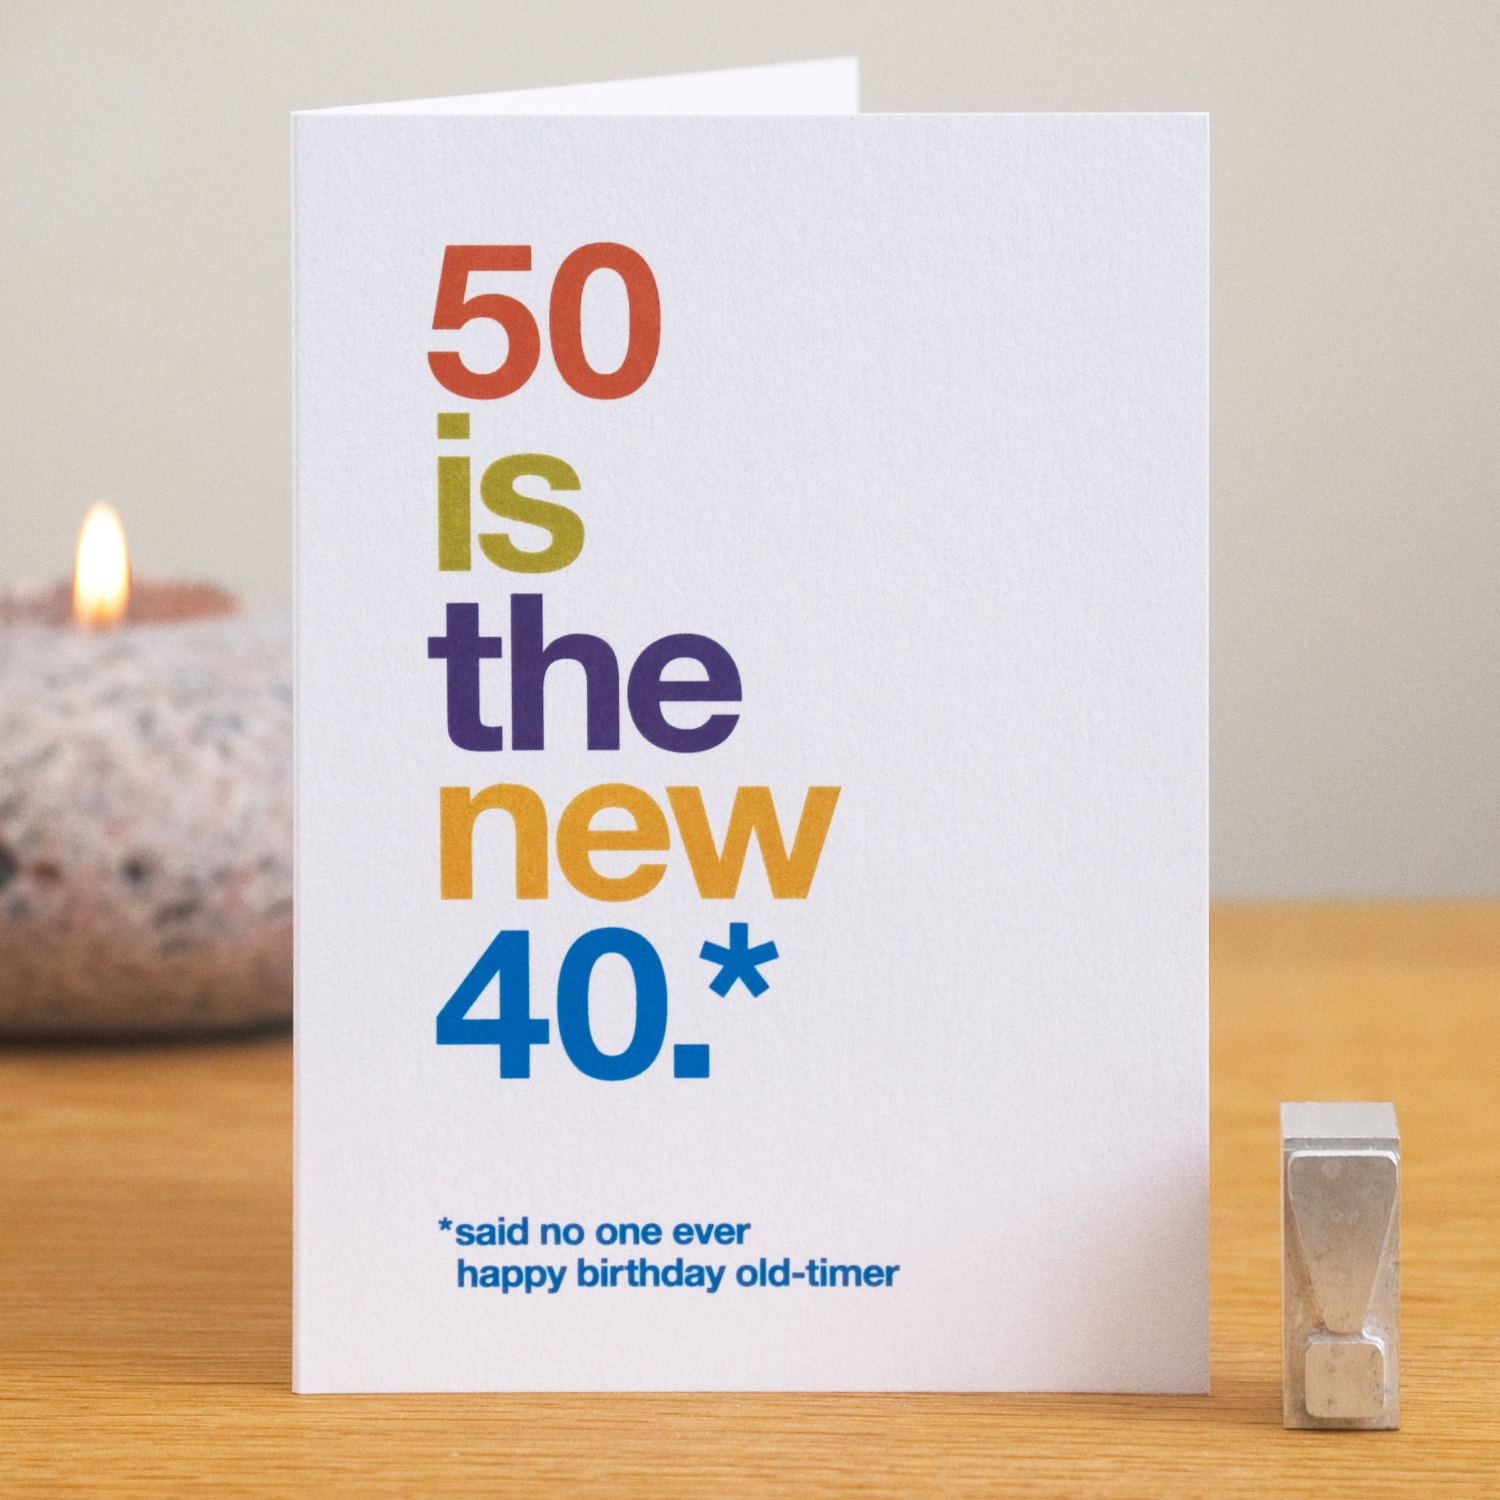 50 Birthday Card Ideas 89 50 Birthday Wishes Messages 10 Top 50th Birthday Quotes Wishes